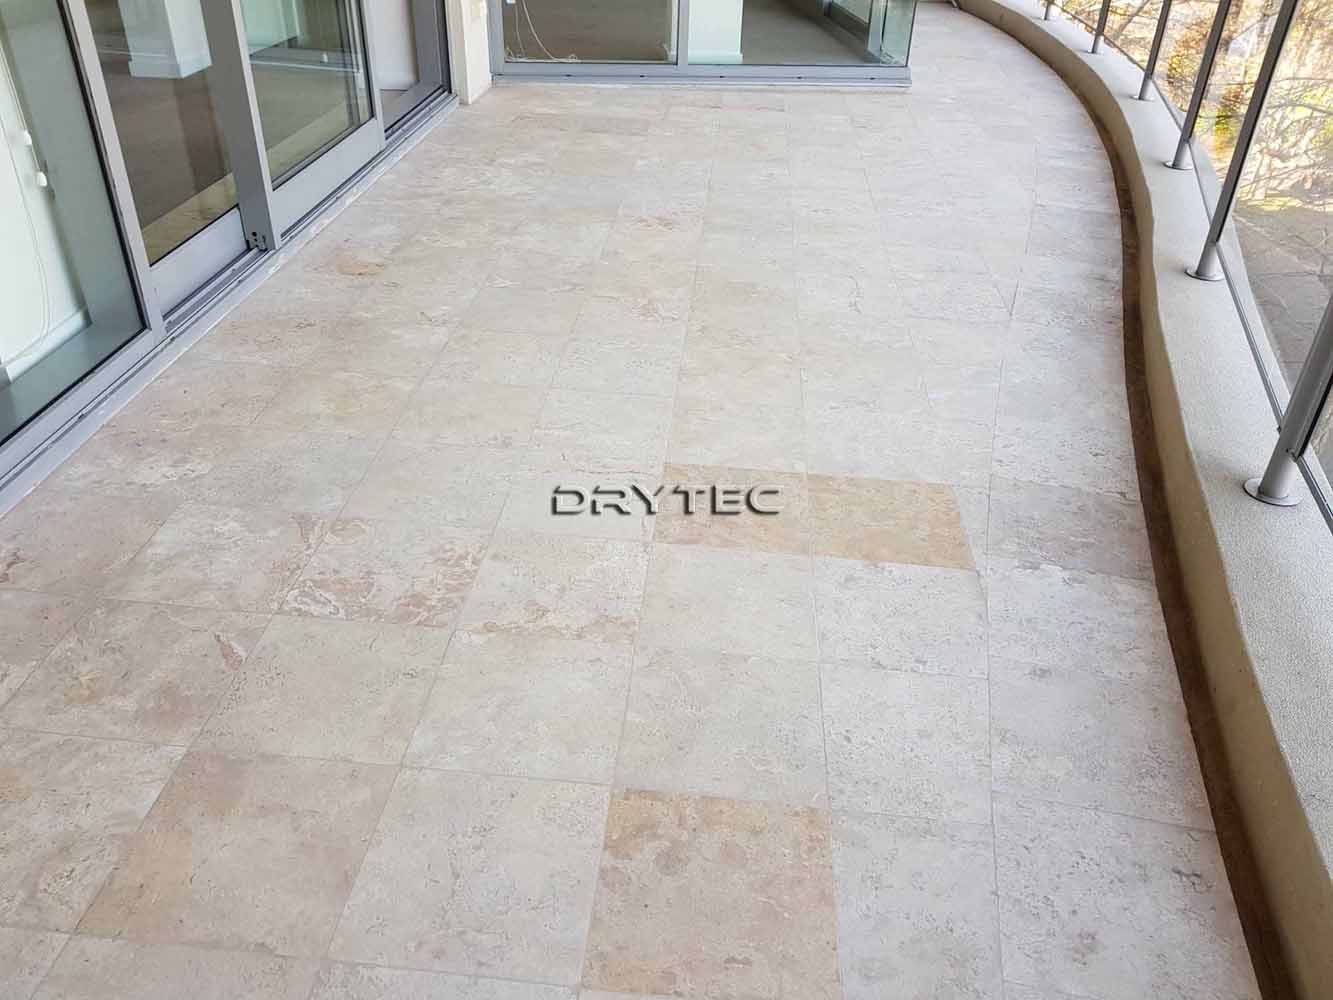 Travertine Floor Tiles Restoration-Grinding-Honing-Polishing-Cleaning and Sealing Service in Perth WA